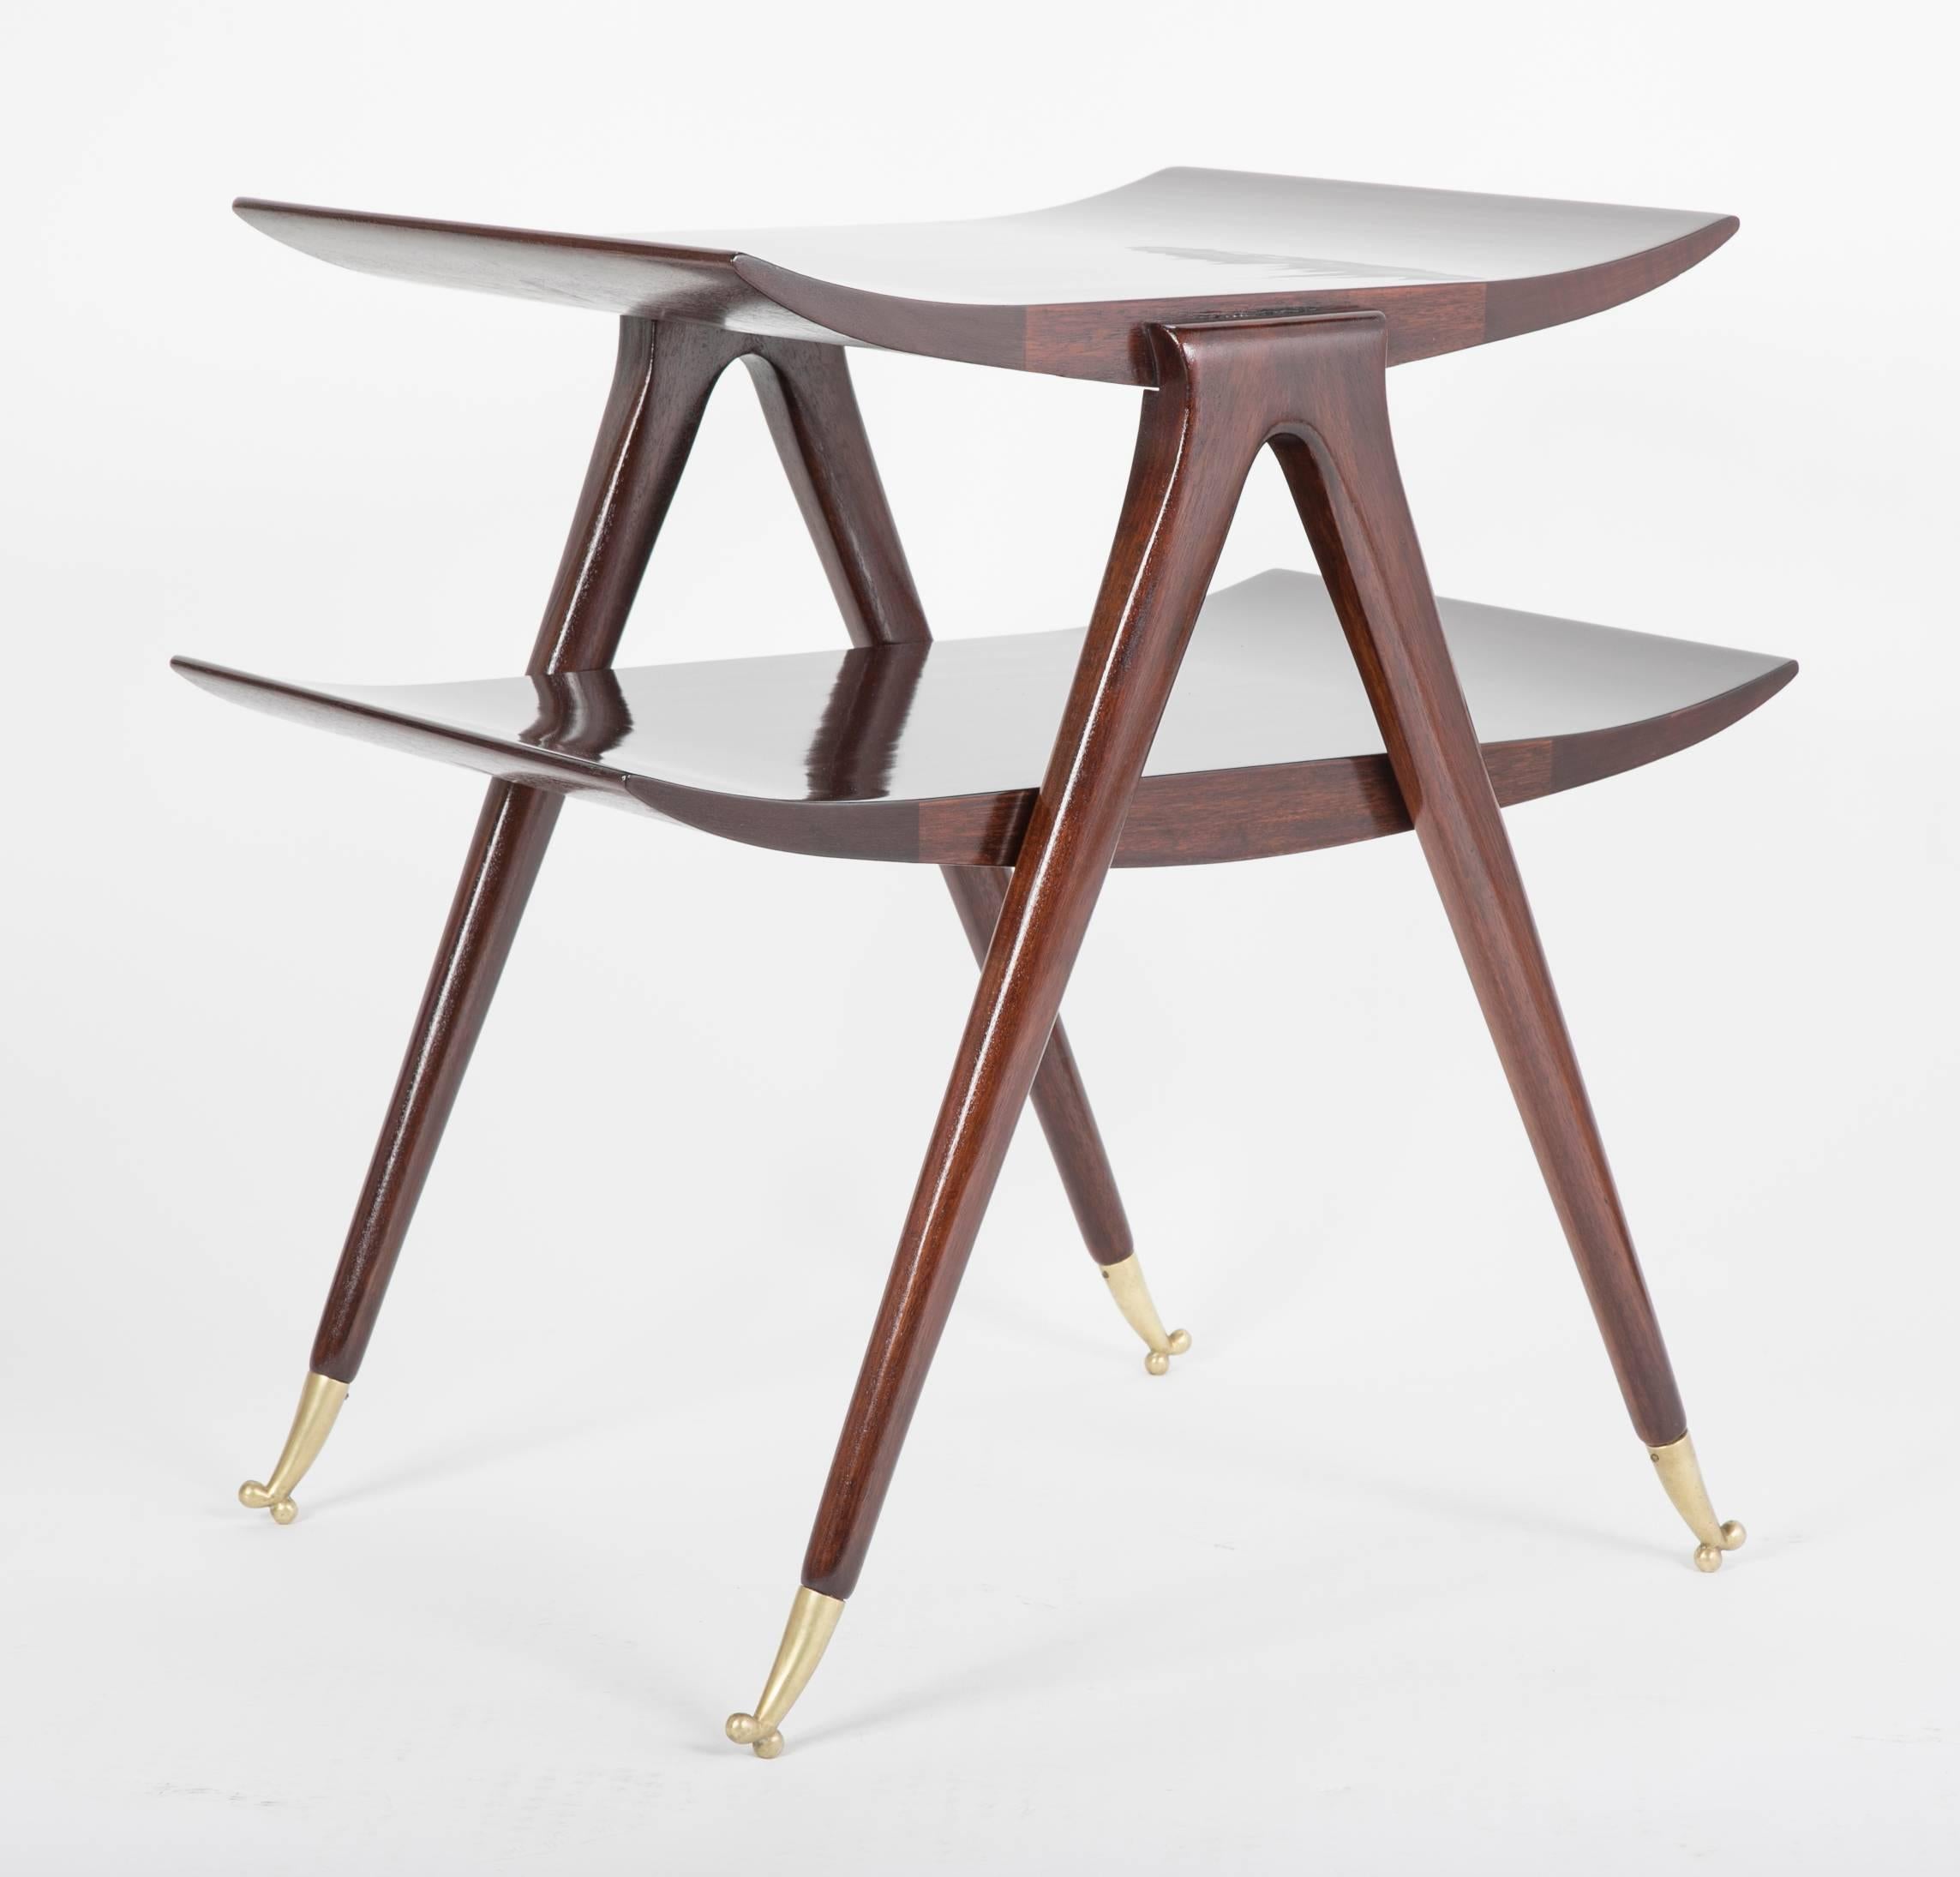 Mid-20th century Italian side table attributed to Ico and Luisa Parisi. A two-tiered walnut table with curved ends, brass tapered sabots with ball feet. This slick designed high quality table also presents similarities with smaller designs